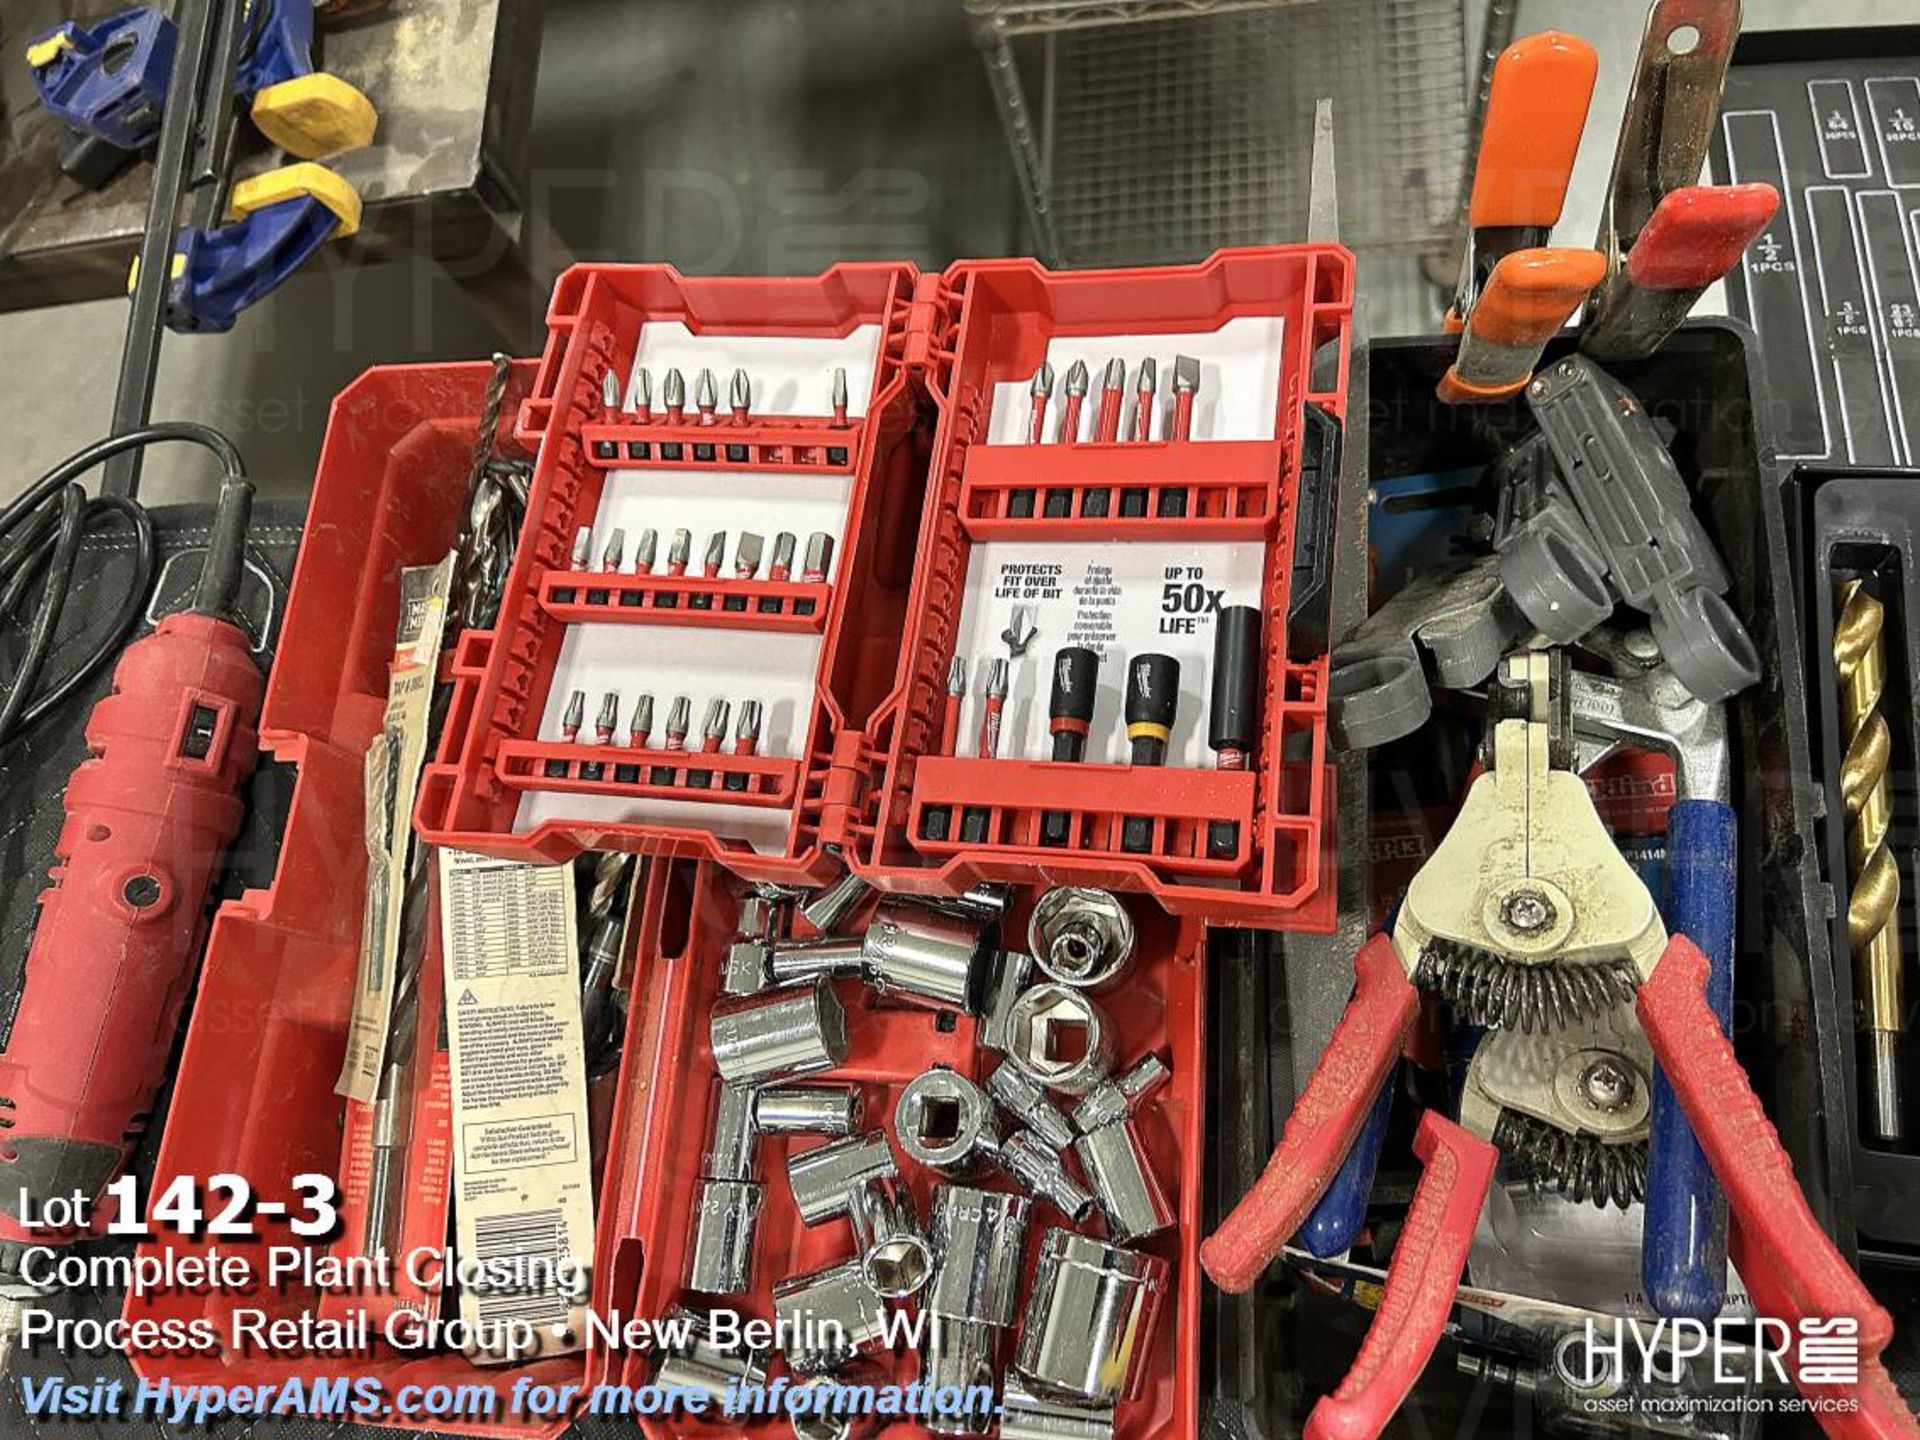 Lot: Drill bits, wire stripers, sockets - Image 3 of 3